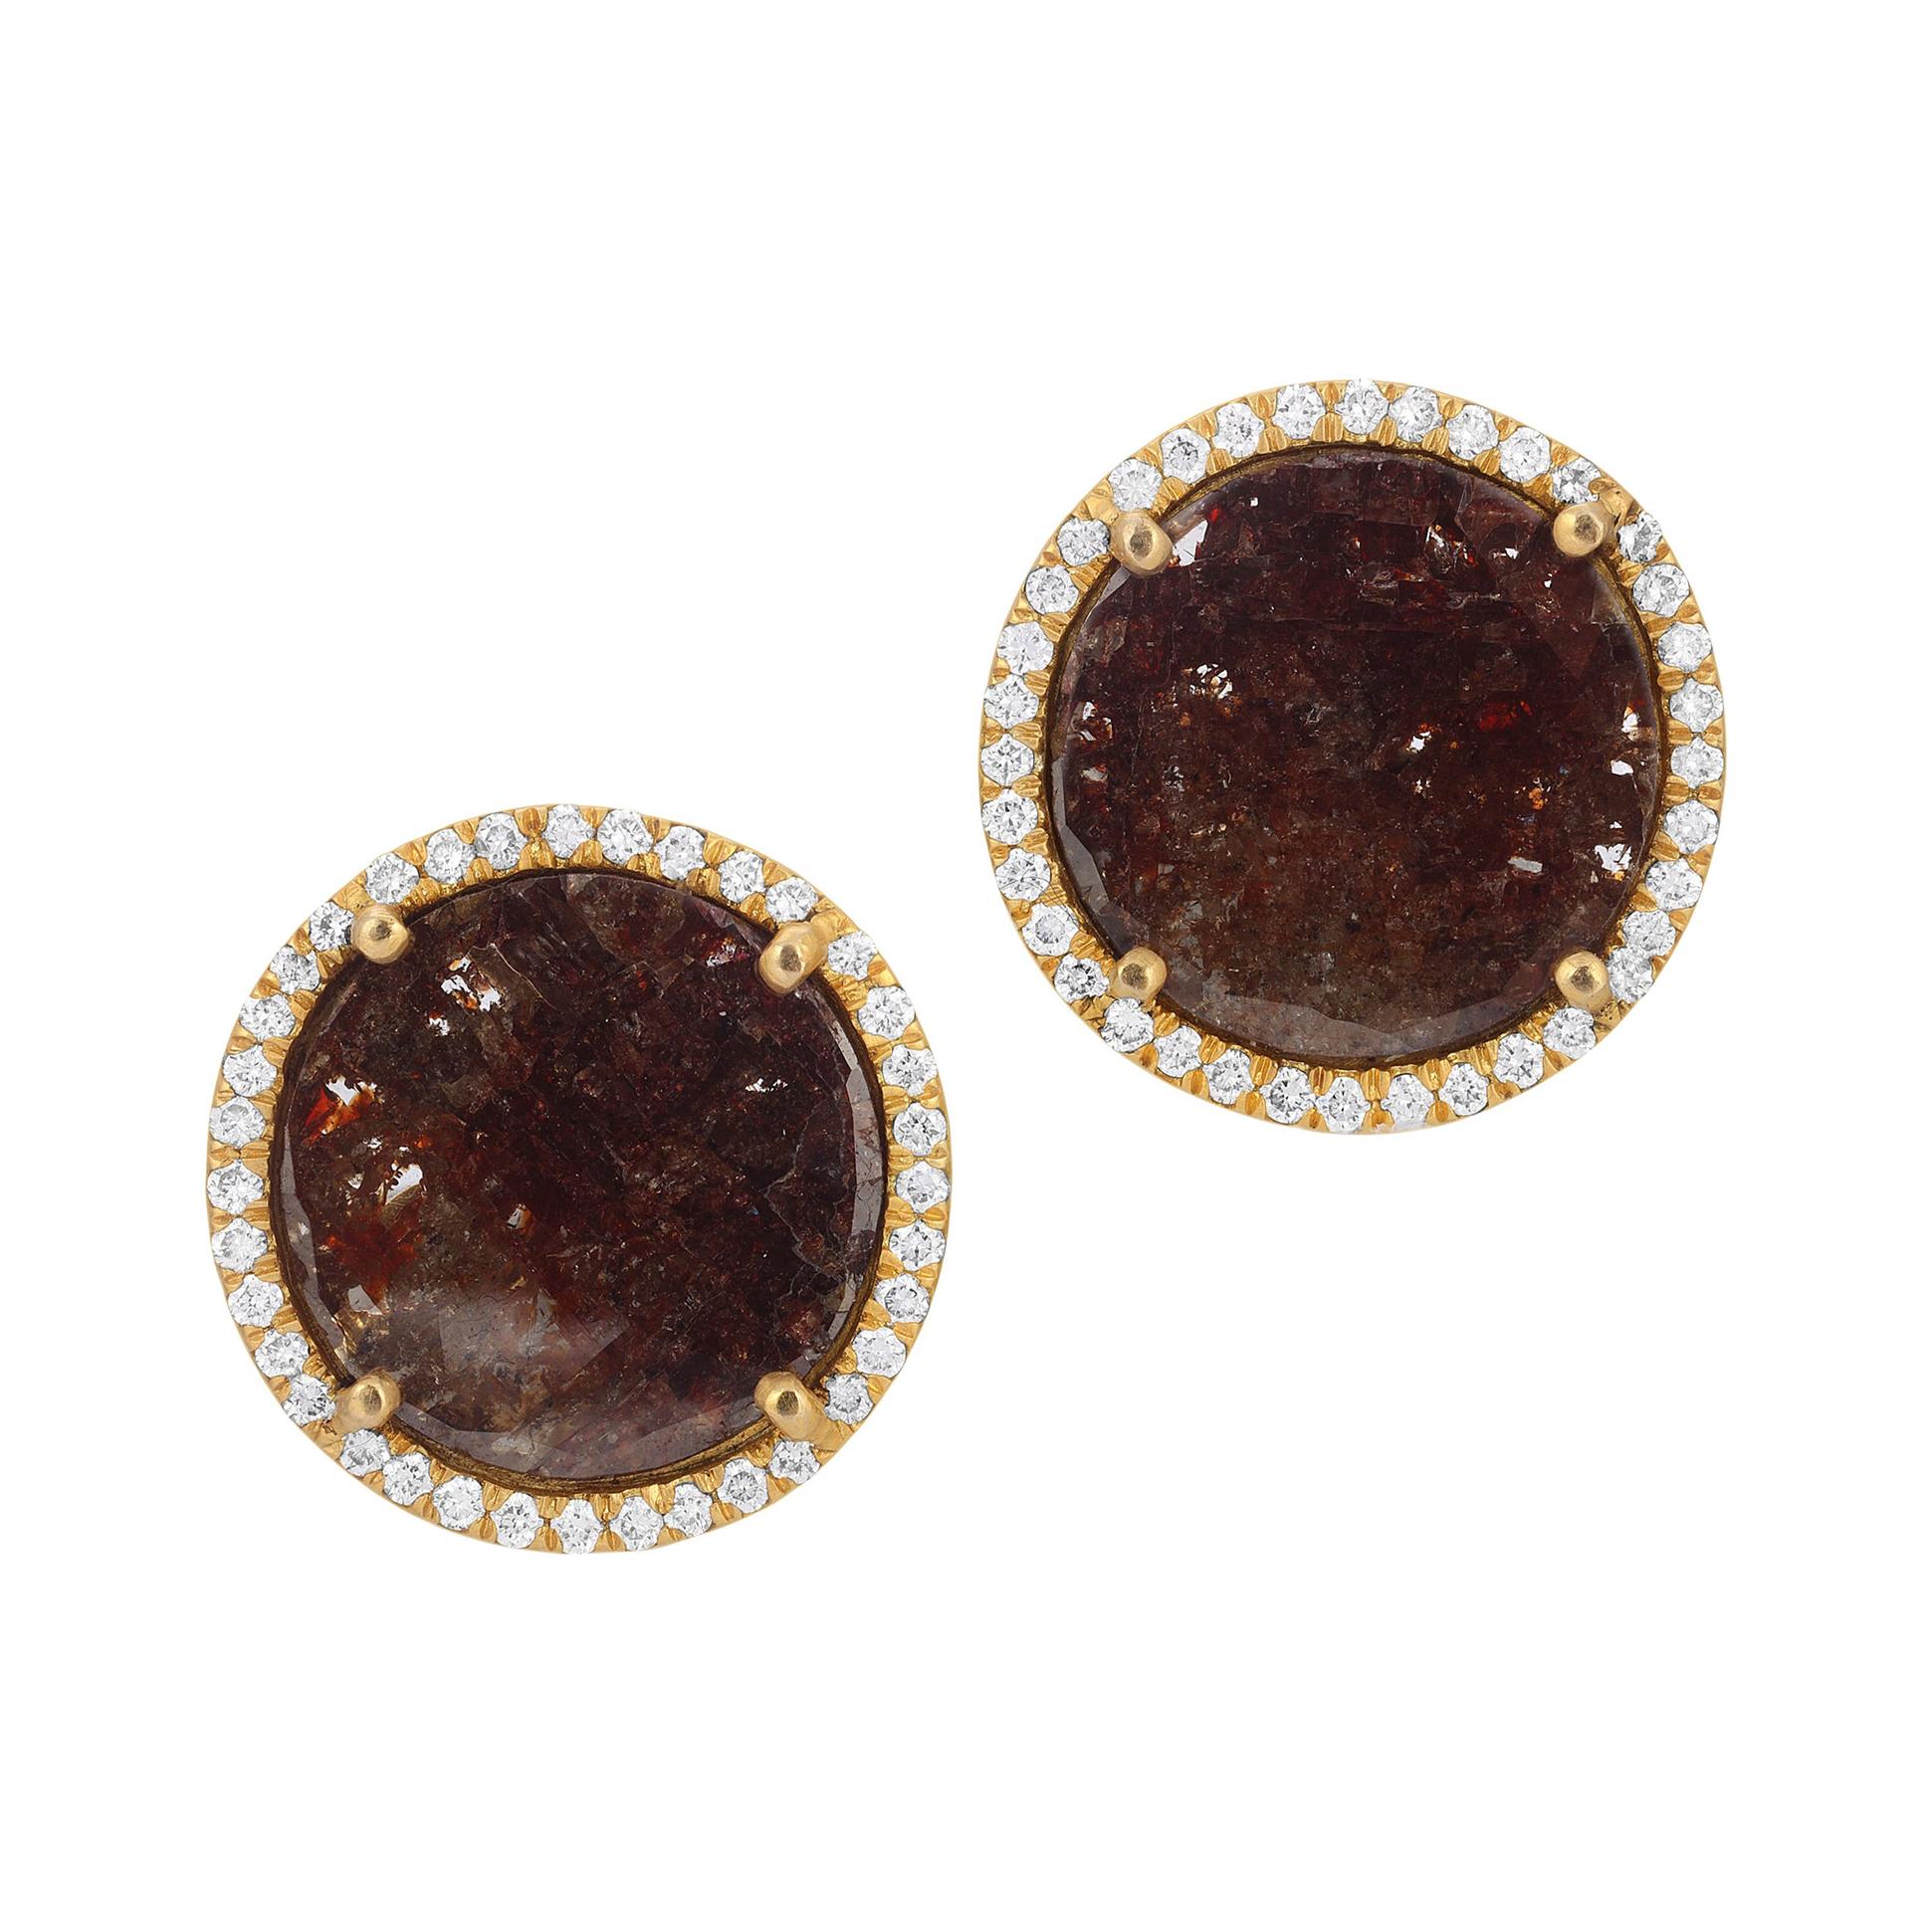 These Lively Diamond Slice Studs with Diamond Pave are a wonderful and modern alternative to a traditional Diamond stud. The Slices are 2.80ct Dark Brown with flecks of Red with .31ct vs quality Diamond Pave Halo's in 18k Matte Finish Yellow Gold. 